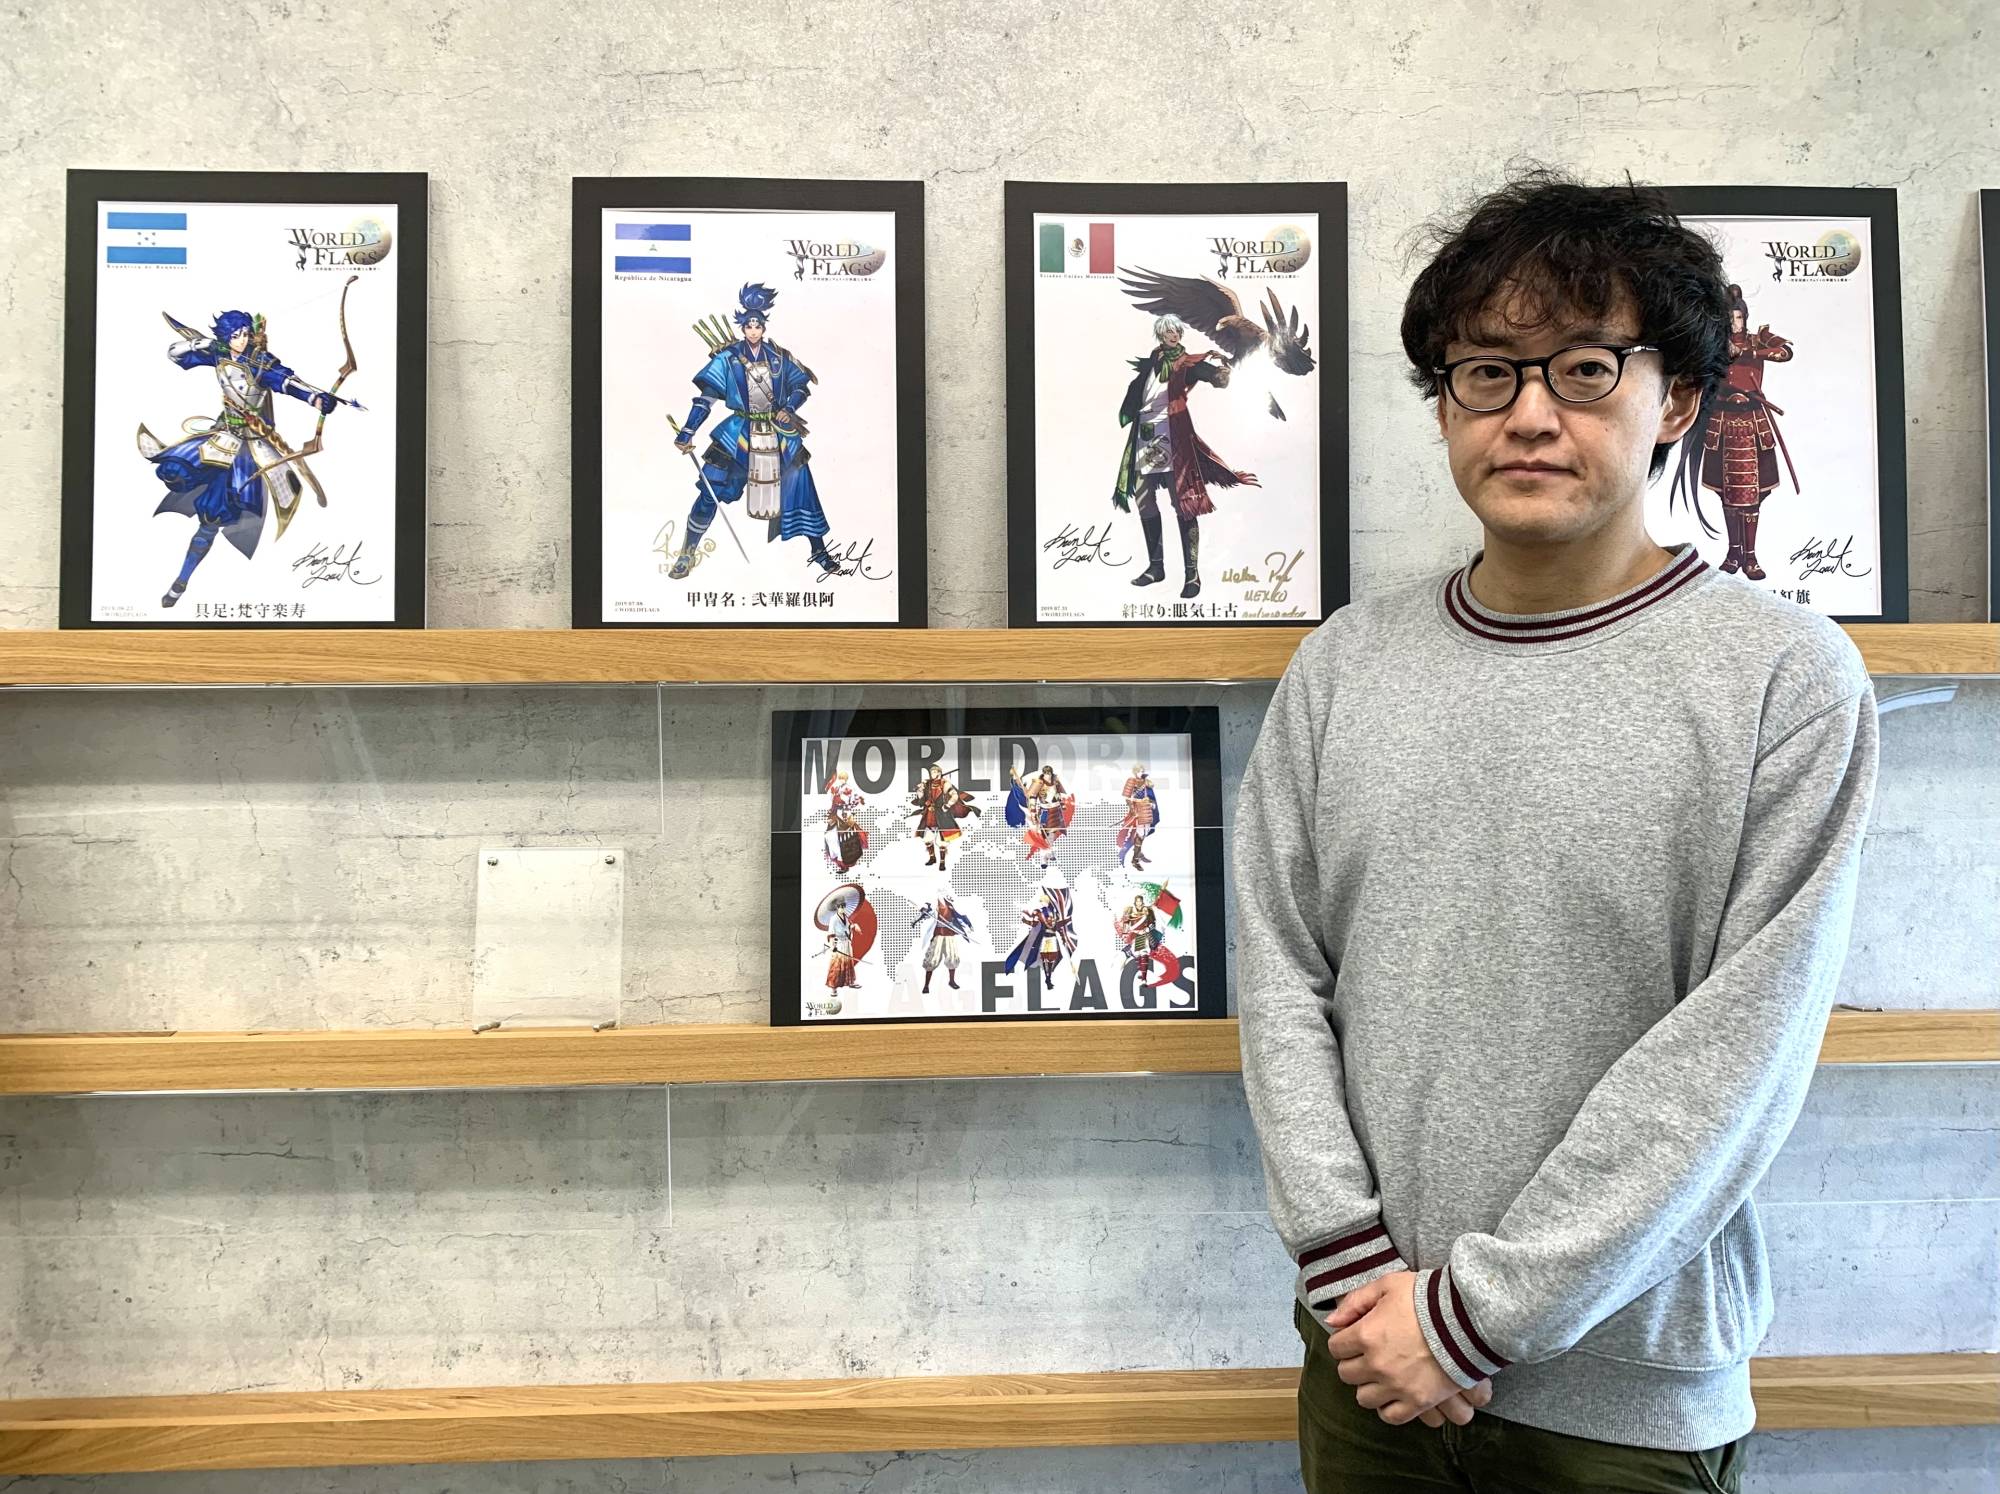 Fly the flag: Kozo Yamada, public relations officer at Digital Entertainment Asset Pte. Ltd., which works with the World Flags project, stands in front of some of the framed illustrations in their office in Tokyo.  | KYODO